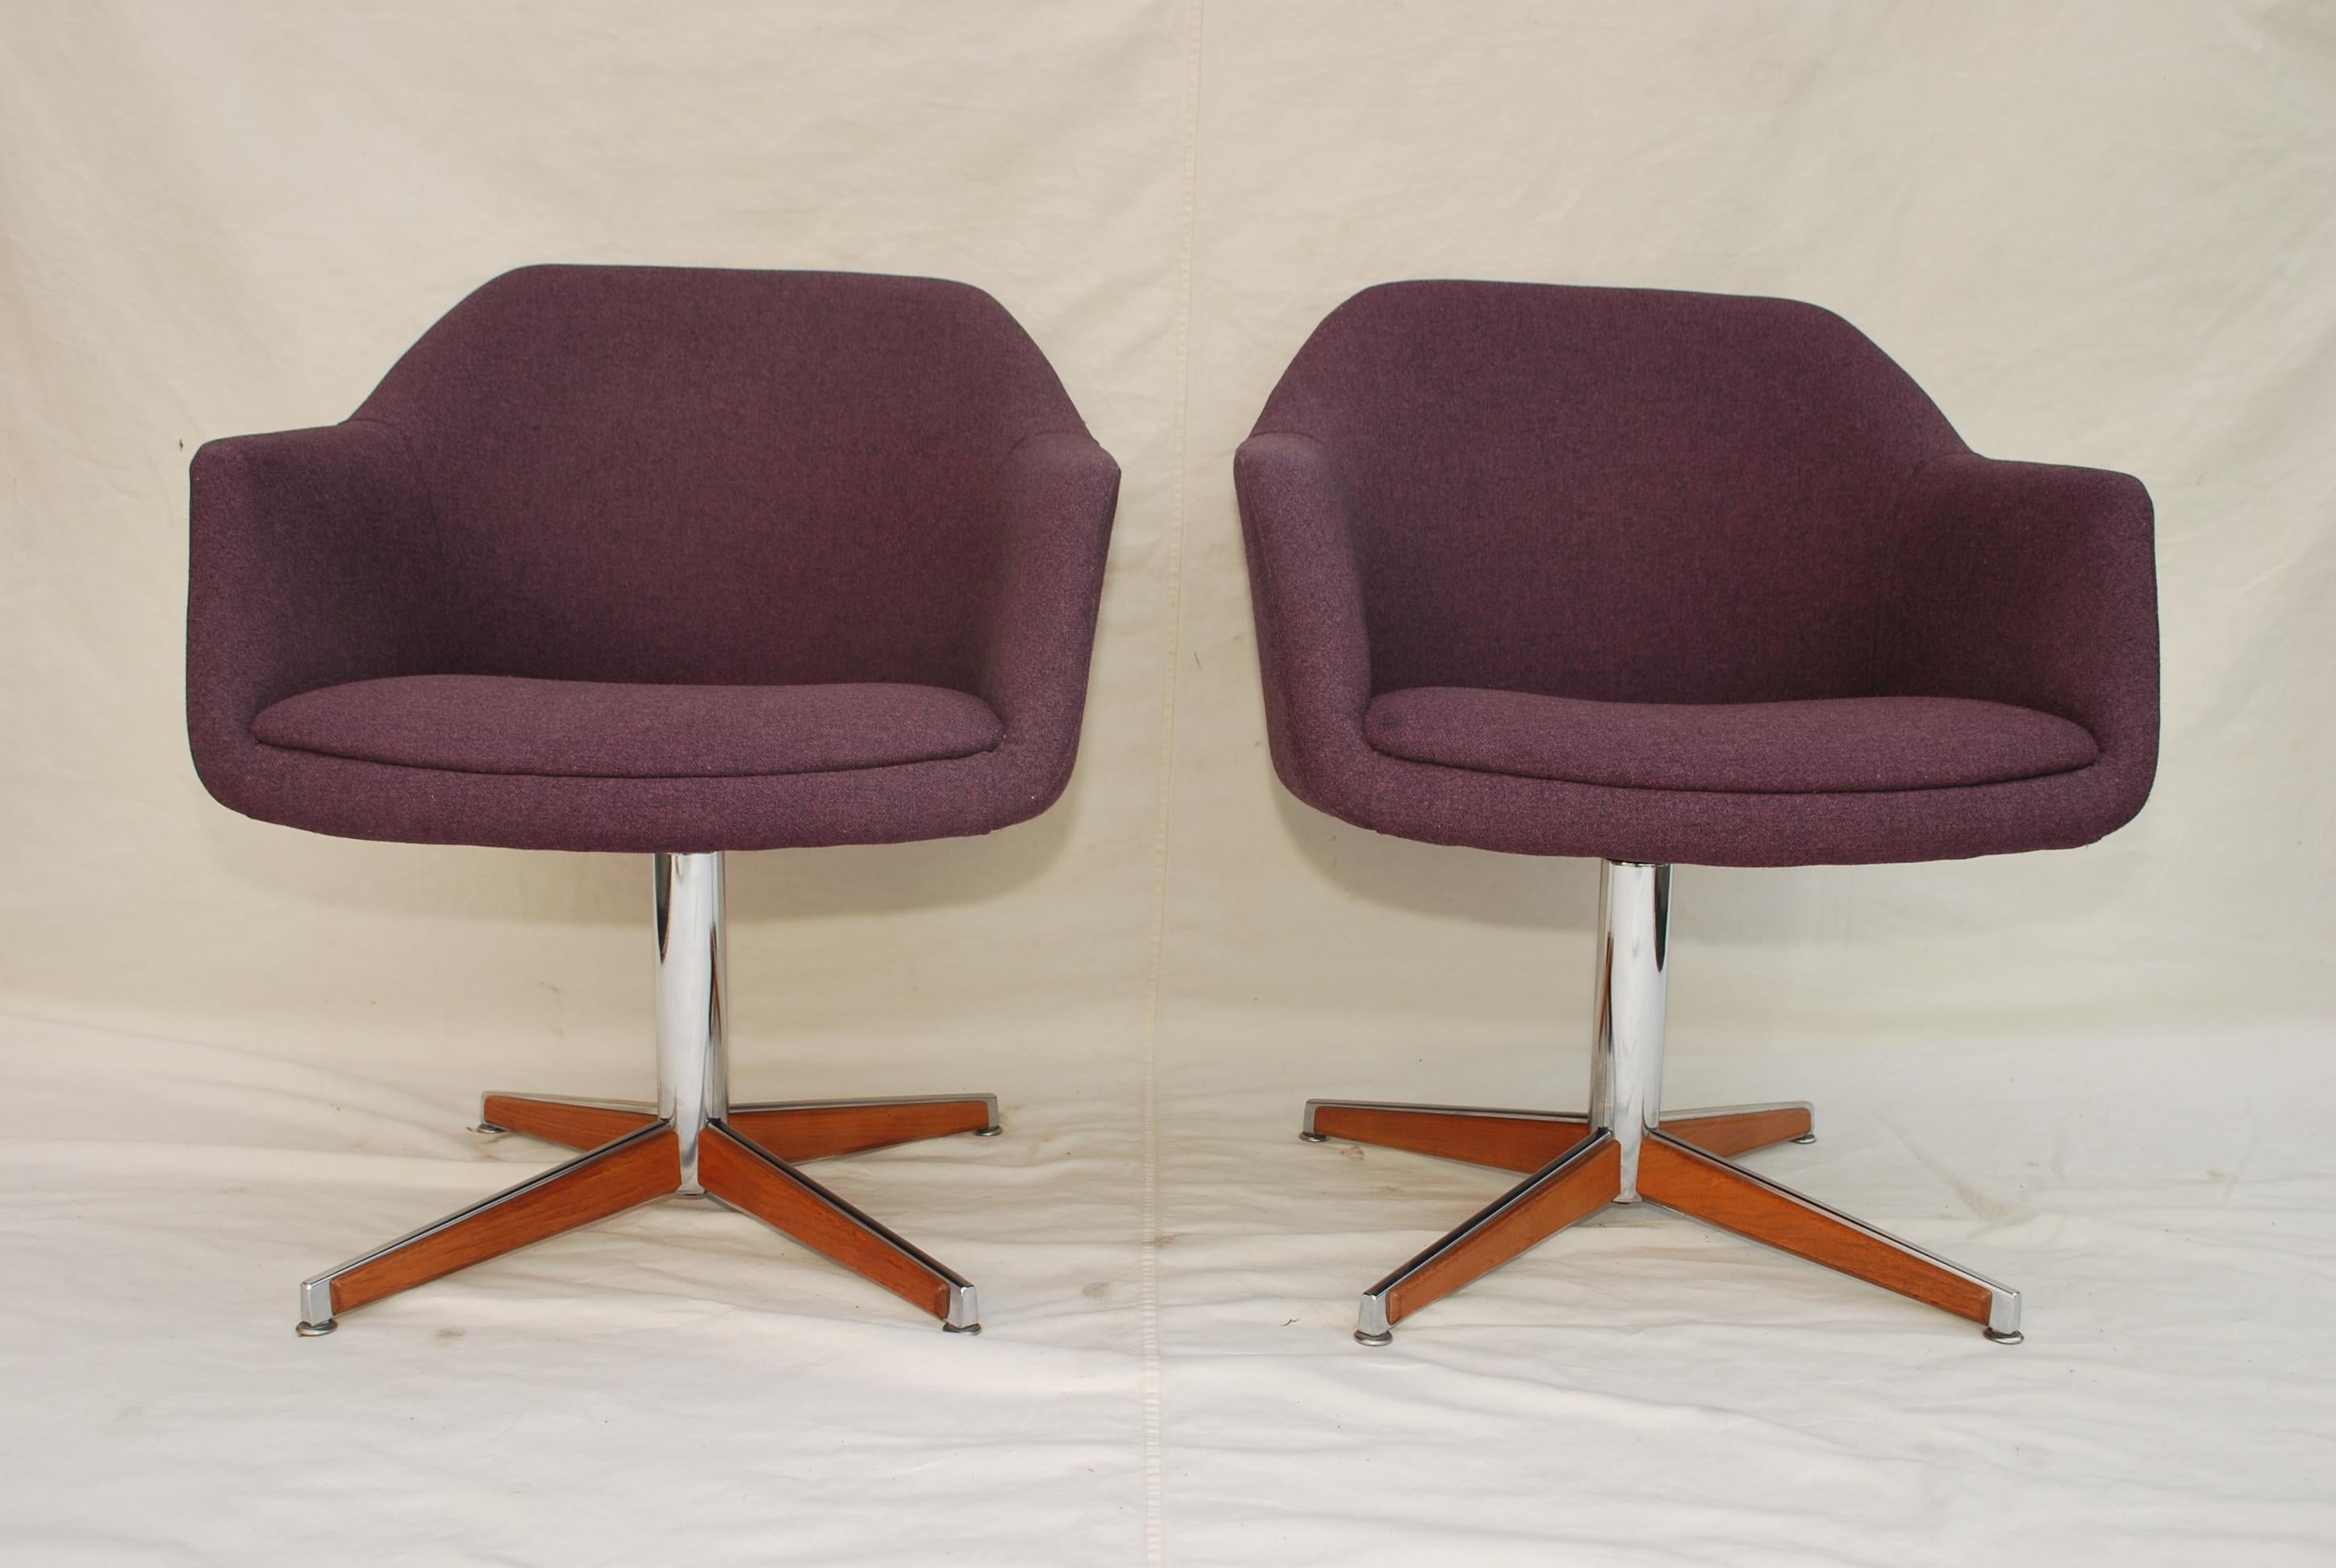 A beautiful pair of 1960's chairs from Denmark, the black mark on the fabric is not there anymore, it was just water, I love these chairs, it is quite unusual to have wood on chrome